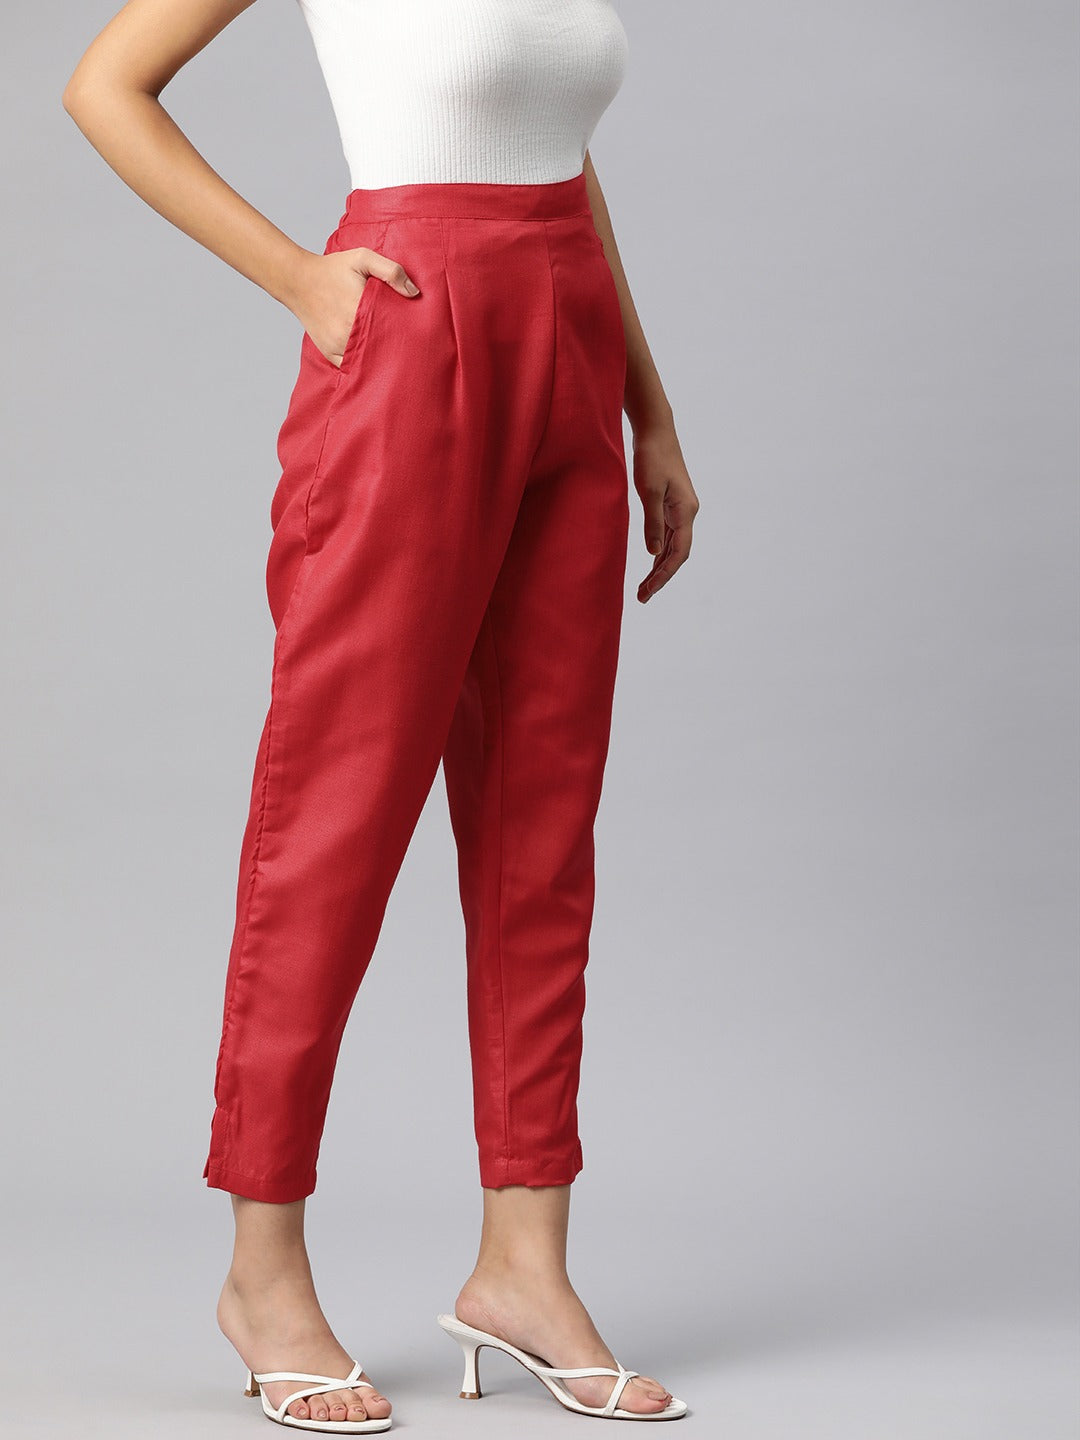 Plain Paperbag trousers at Rs 299/piece in Delhi | ID: 2852606067033